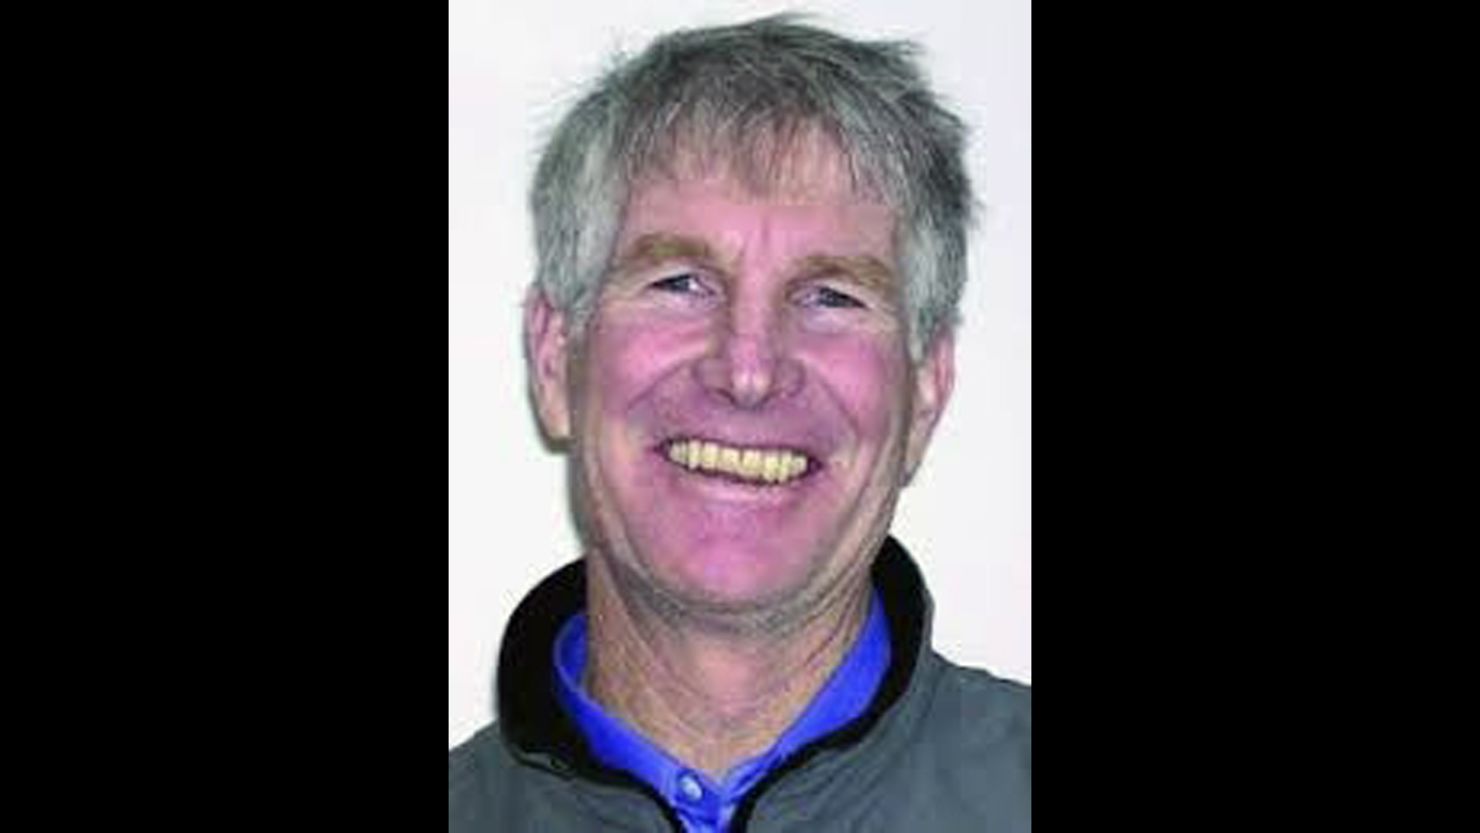 James "Randy" Udall went missing after a solo backpacking trip